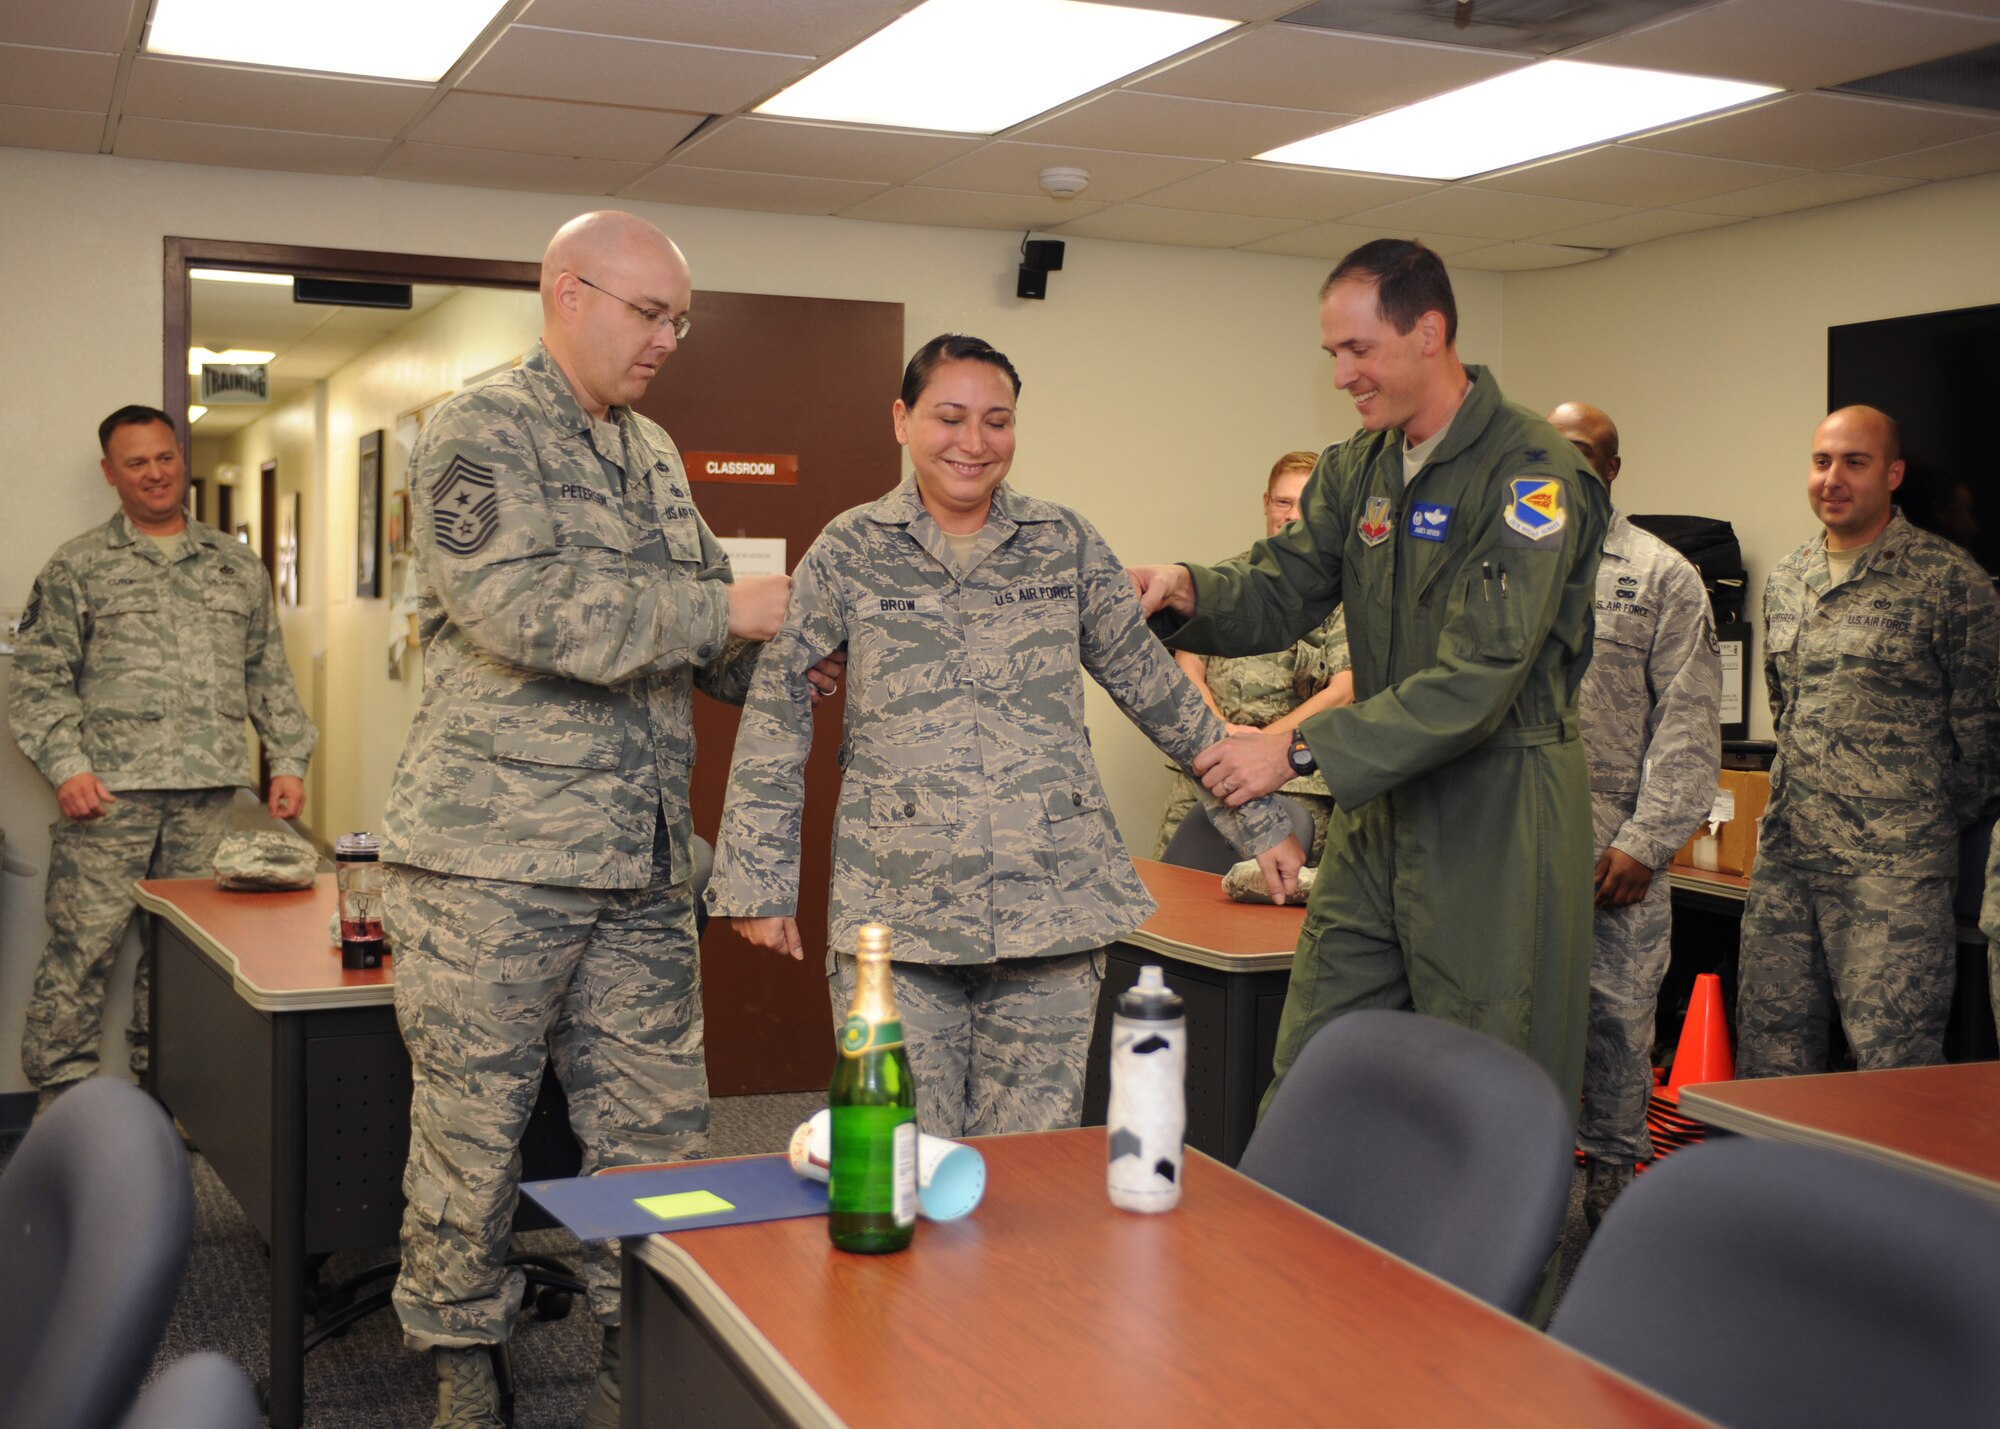 U.S. Air Force Col. James Meger, 355th Fighter Wing commander, and Chief Master Sgt. Ryan Peterson, 355th FW command chief, punch the rank of technical sergeant on to Tech. Sgt. Lisa Brow, 355th Civil Engineer Squadron NCO in charge of the Emergency Management flight’s training section, at Davis-Monthan Air Force Base, Ariz., Dec. 23, 2014. Brow was promoted via Stripes for Exceptional Performers for her consistent drive to serve her Airmen and excel in her career. (U.S. Air Force photo by Airman 1st Class Cheyenne Morigeau/Released) 